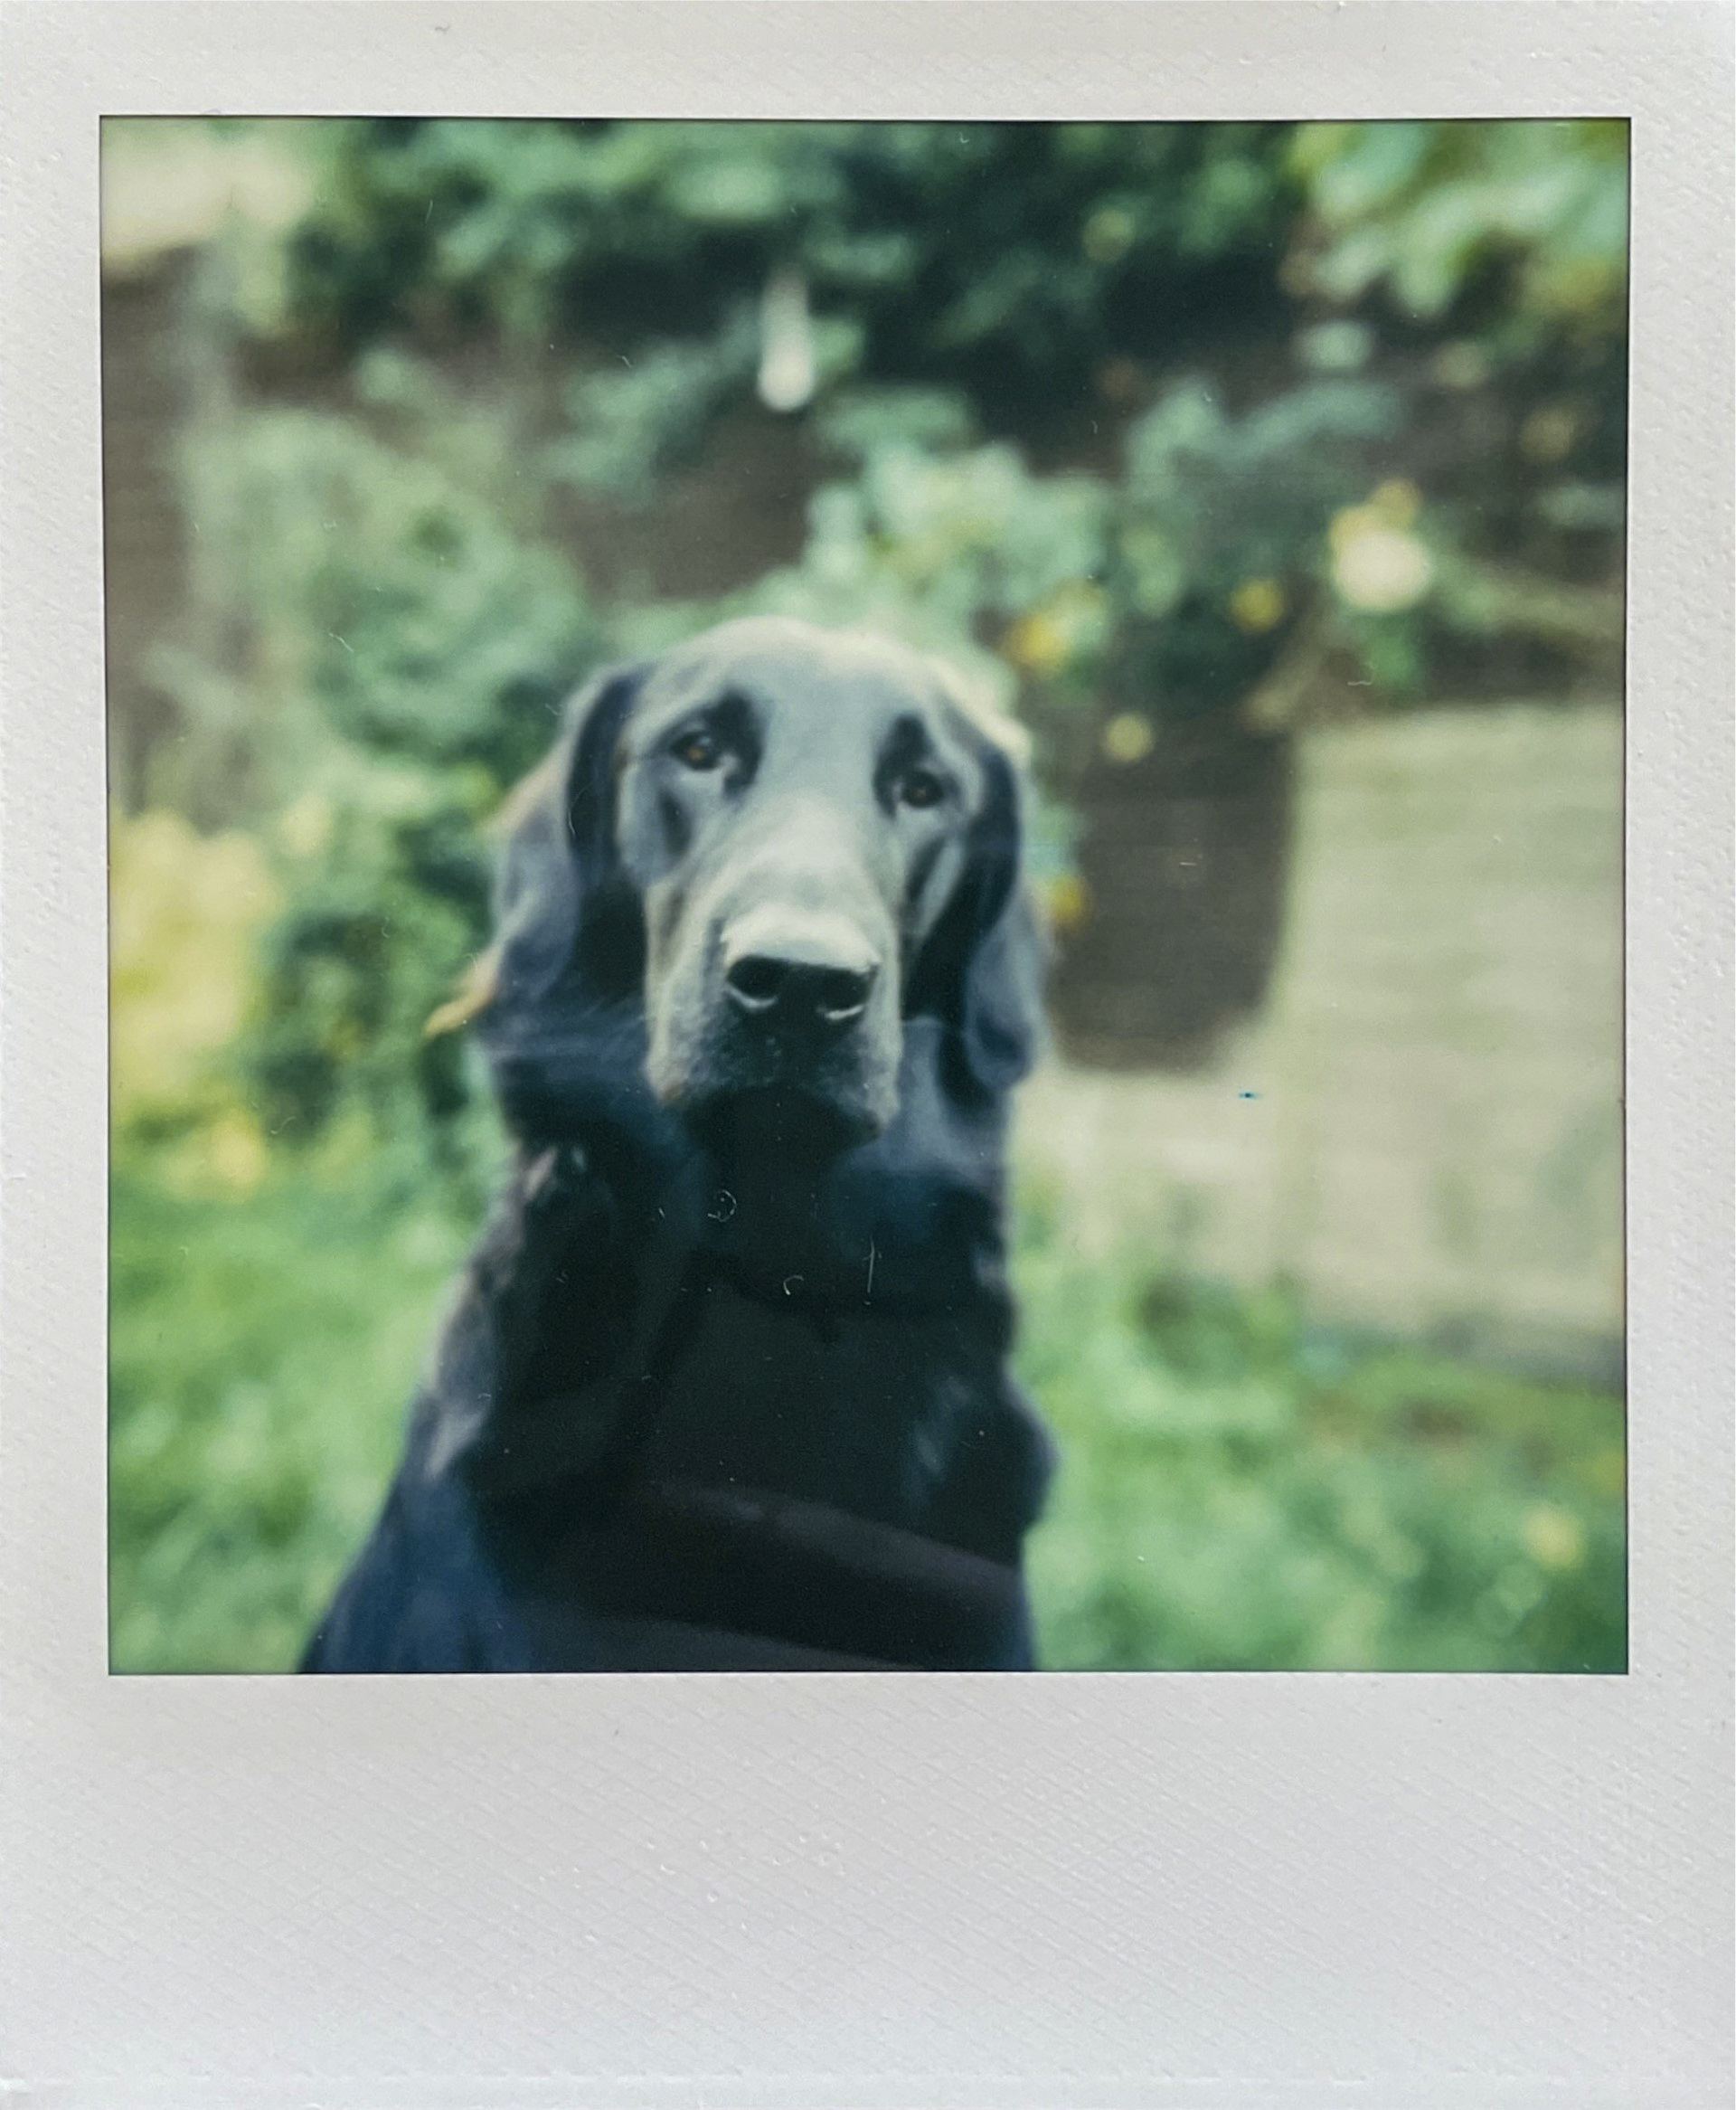 In overcast lighting the Polaroid I-2 does a good job at exposing and capturing tones